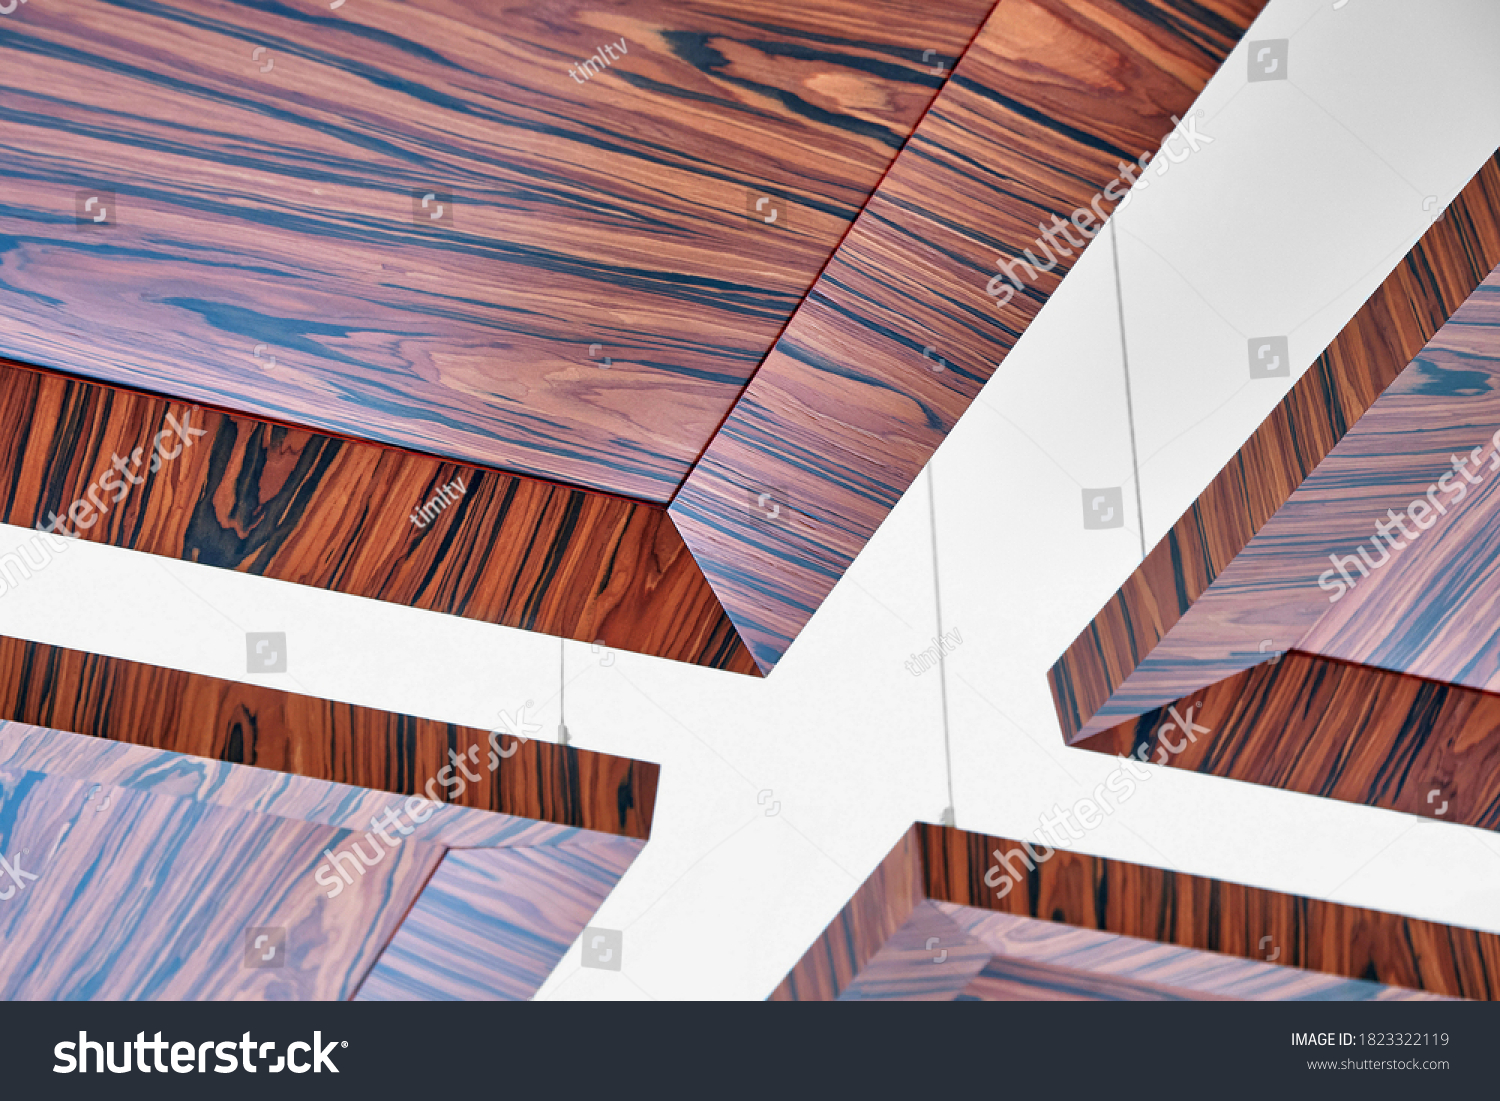 Stock Photo Wooden Ceiling Panels Rosewood Fineline Veneer Ceiling Panels In The Modern Office Close Up 1823322119 